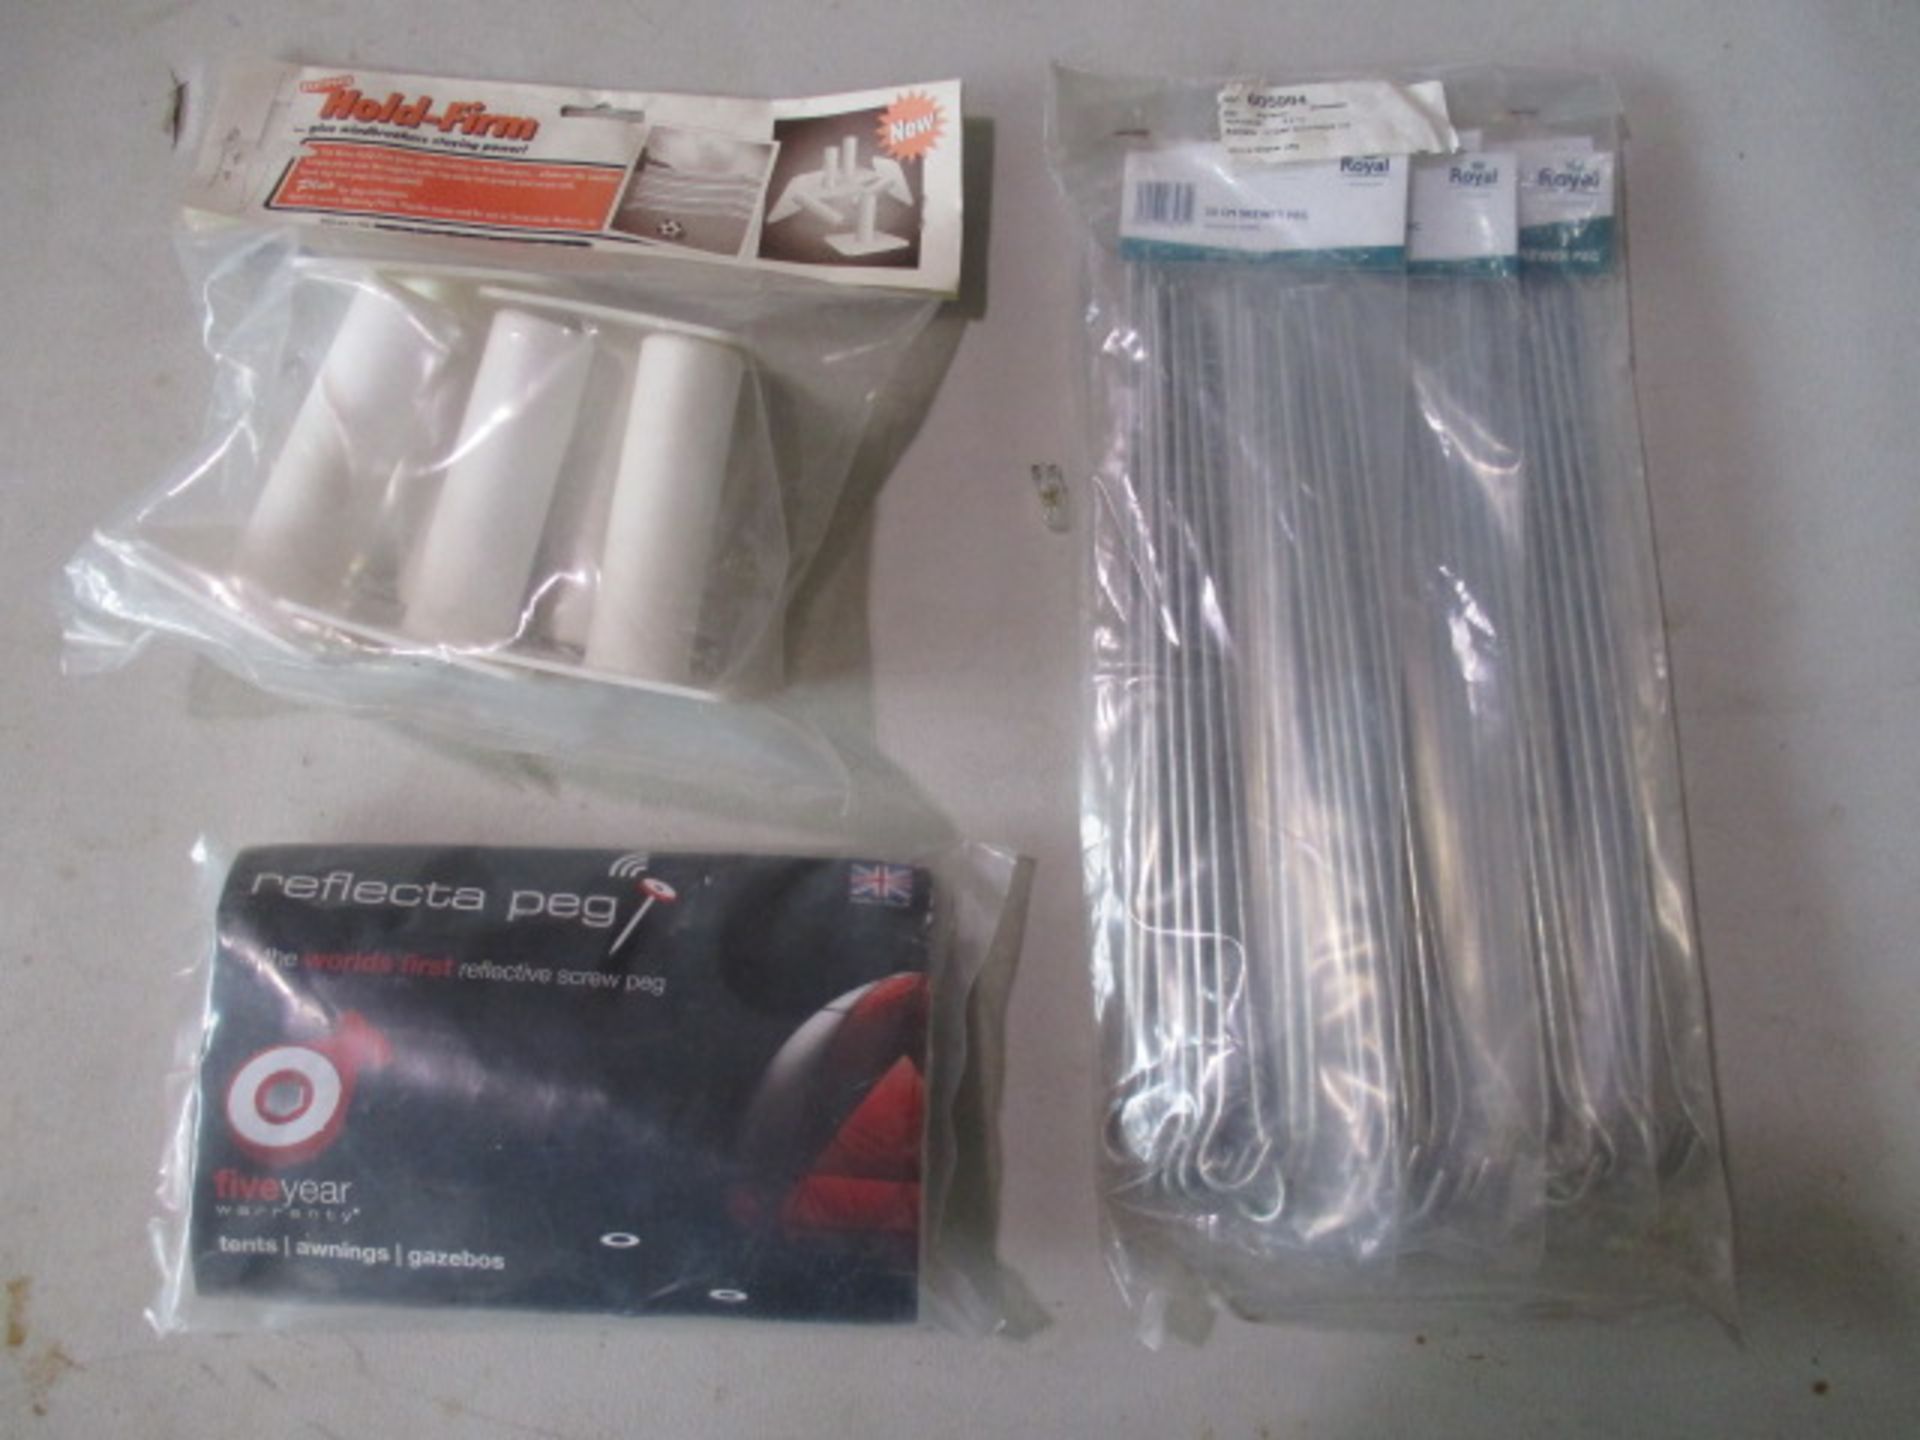 Sealed 50 skewer pegs, 1 pack hold firm windbreaker feet and 1 pack reflectors pegs all Sealed for